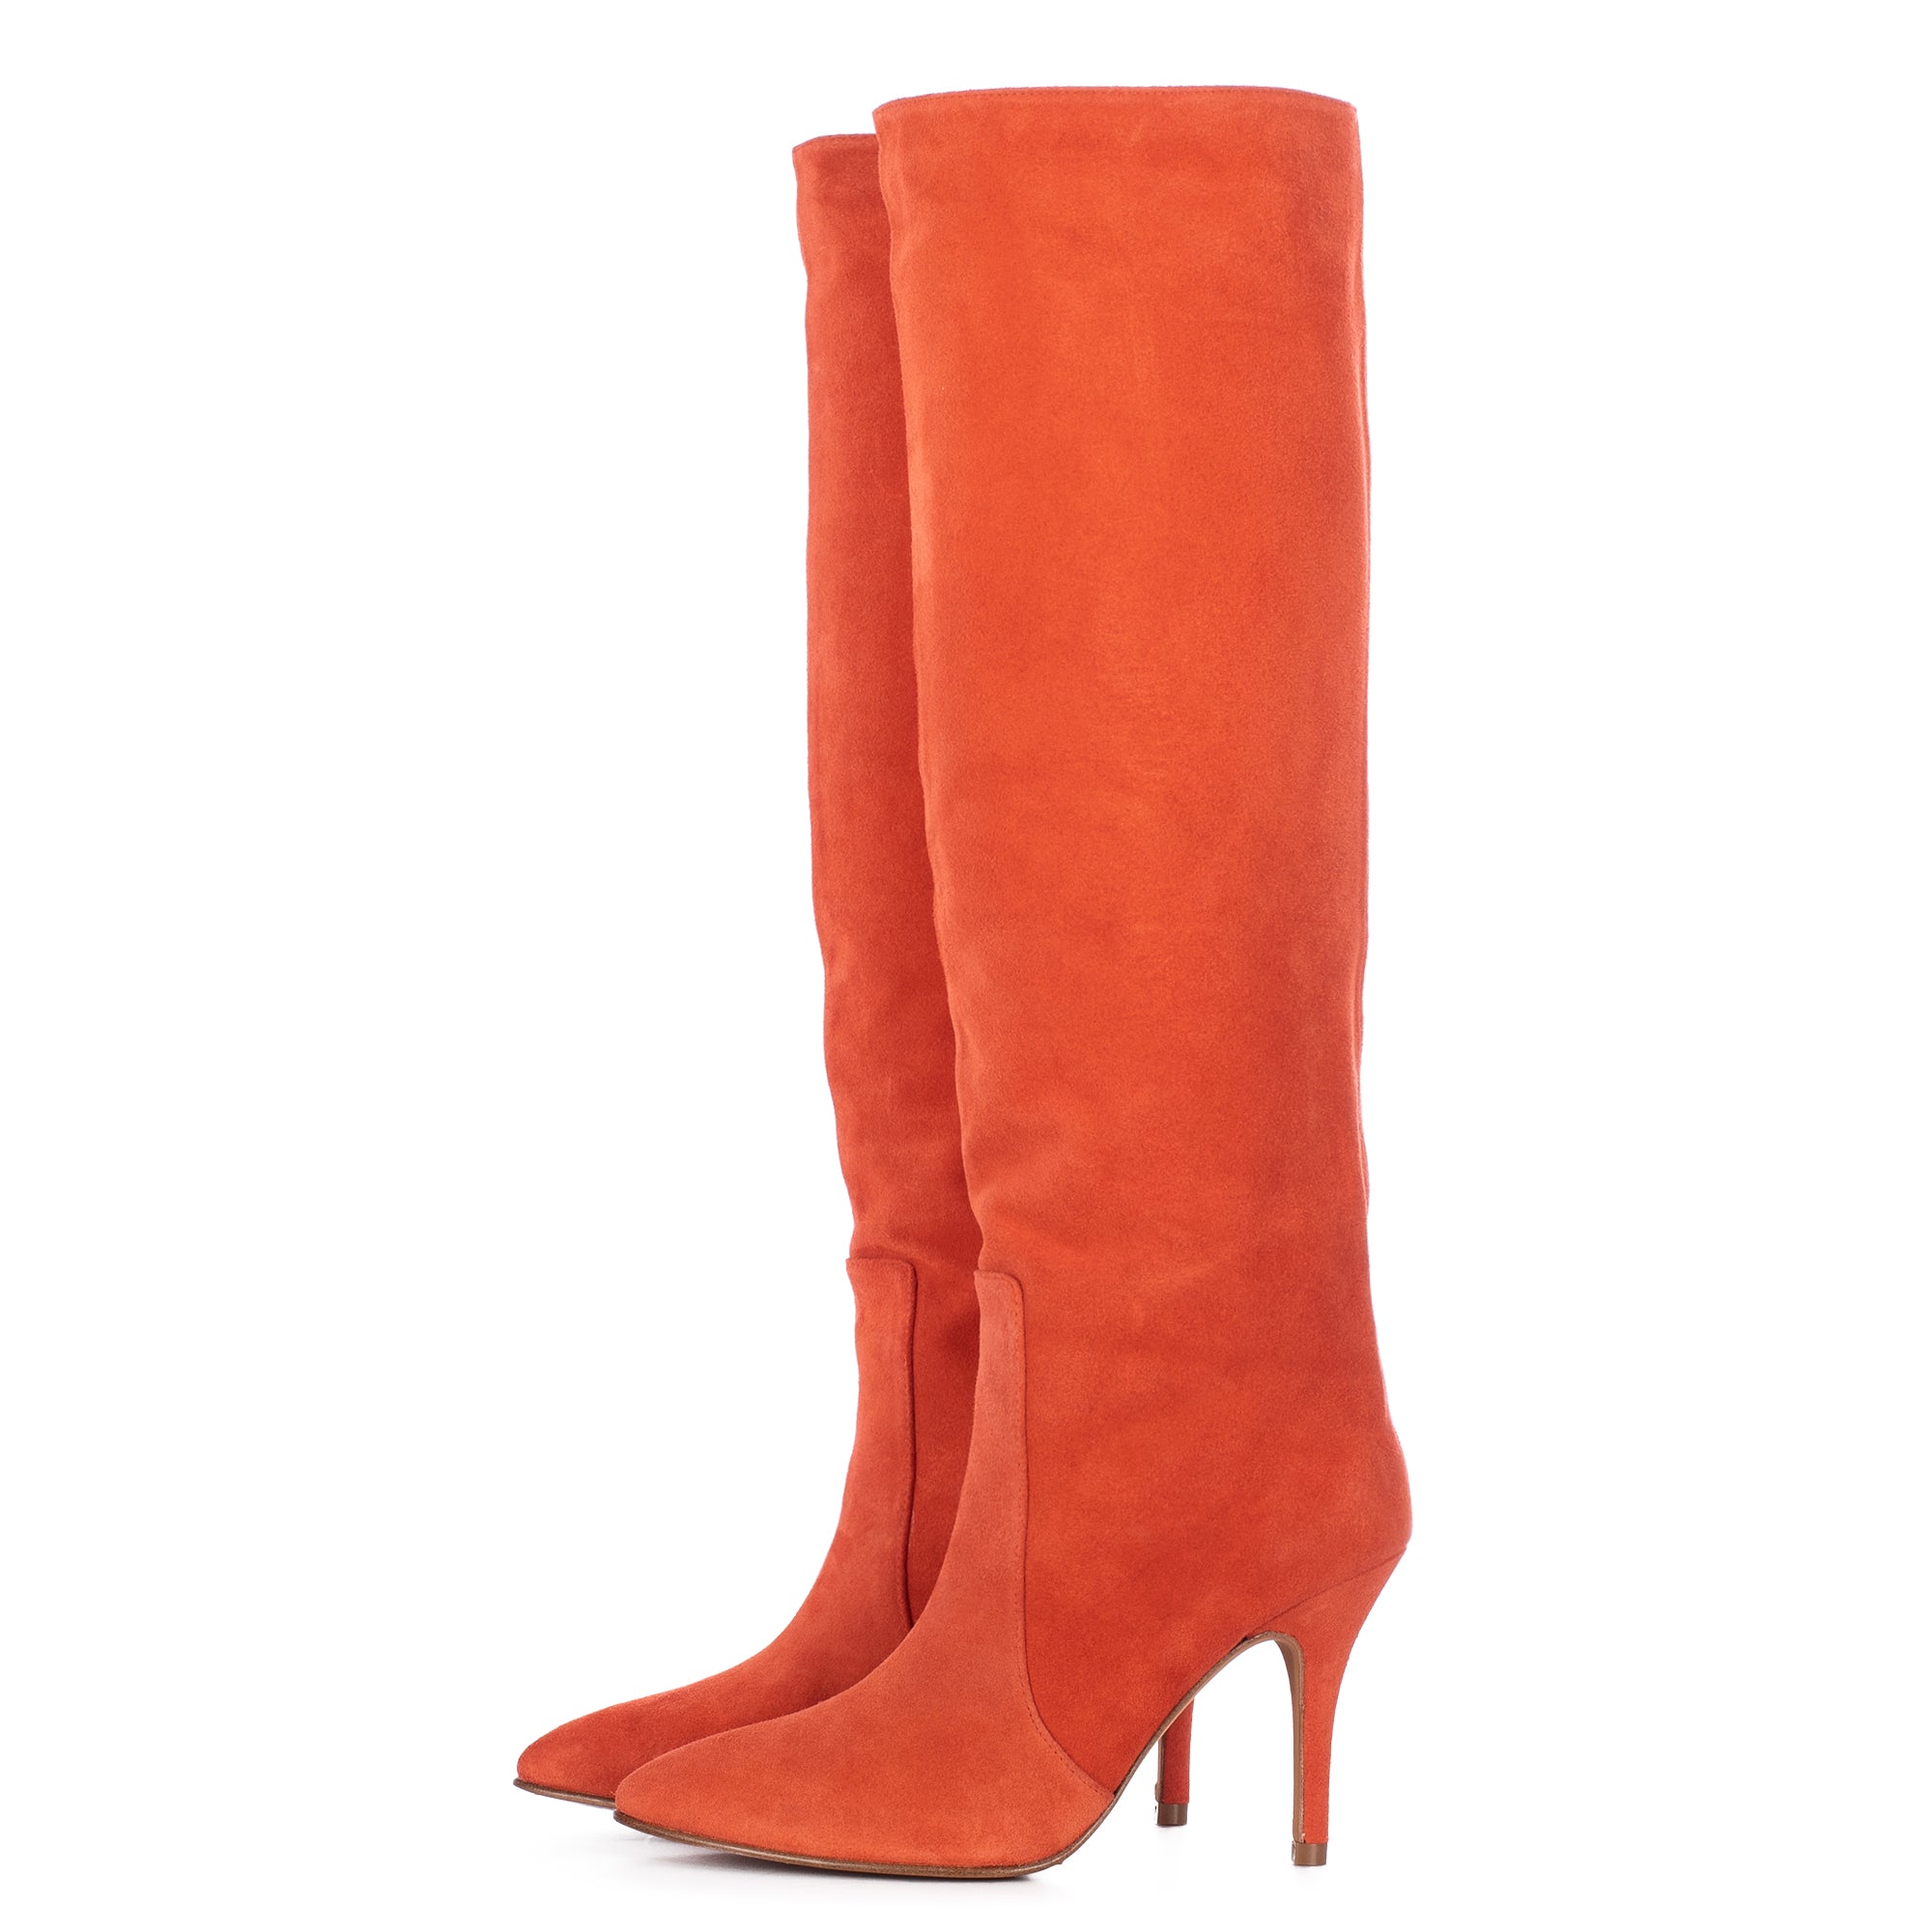 TROPICAL SUEDE KNEE-HIGH BOOTS